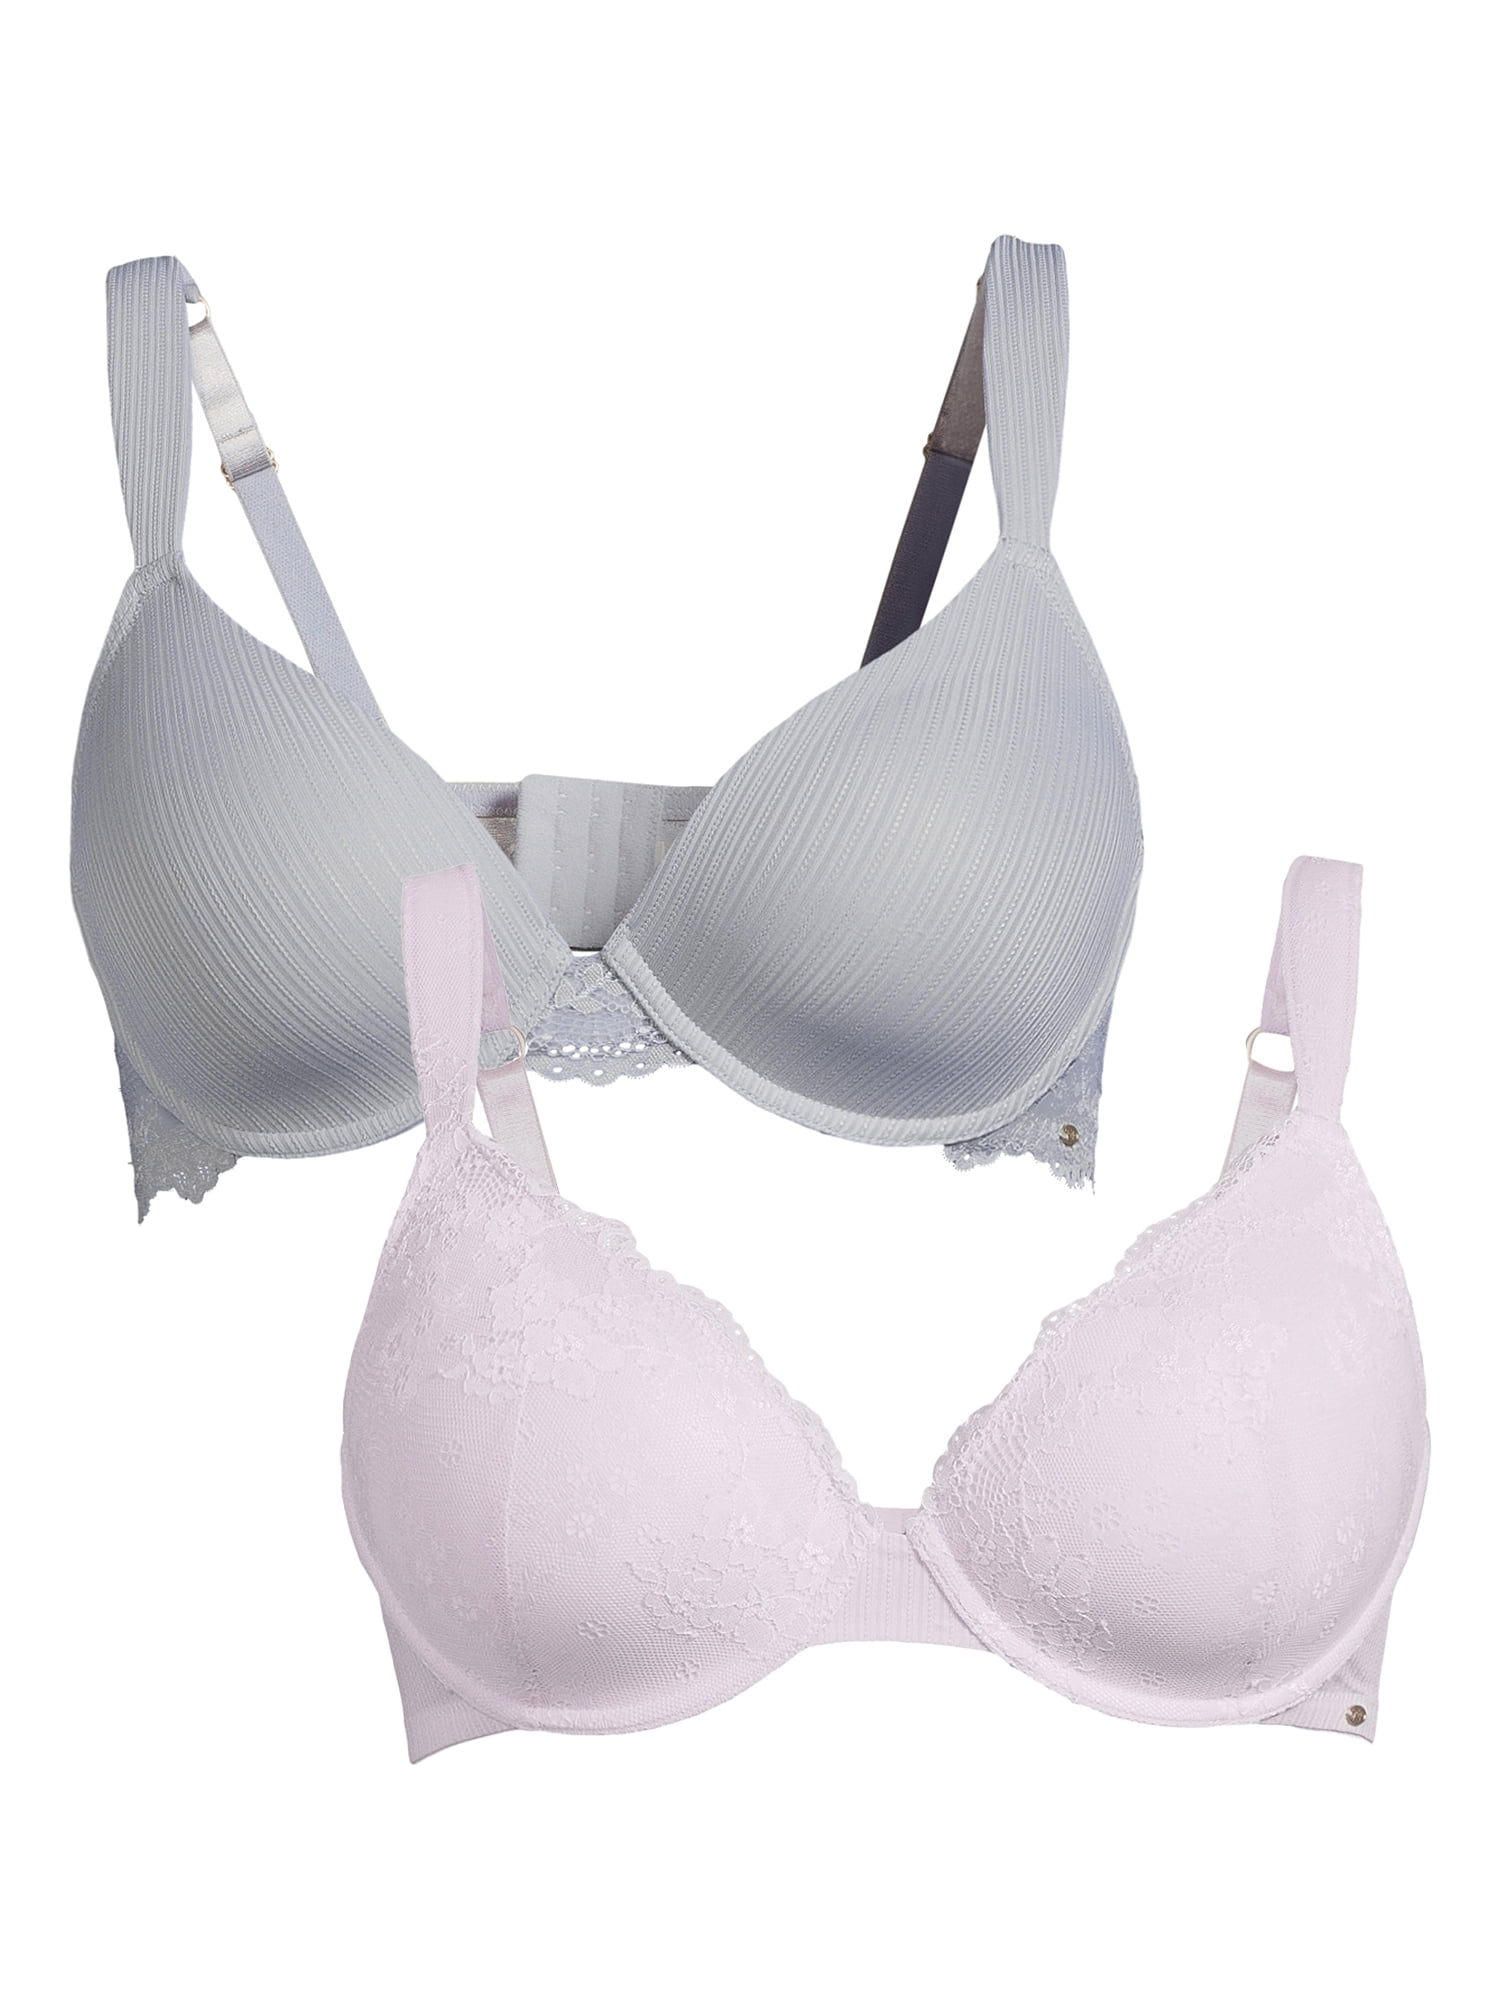 Walmart Jessica Simpson Women's Micro and Lace Wireless Bras, 2-Pack 17.96